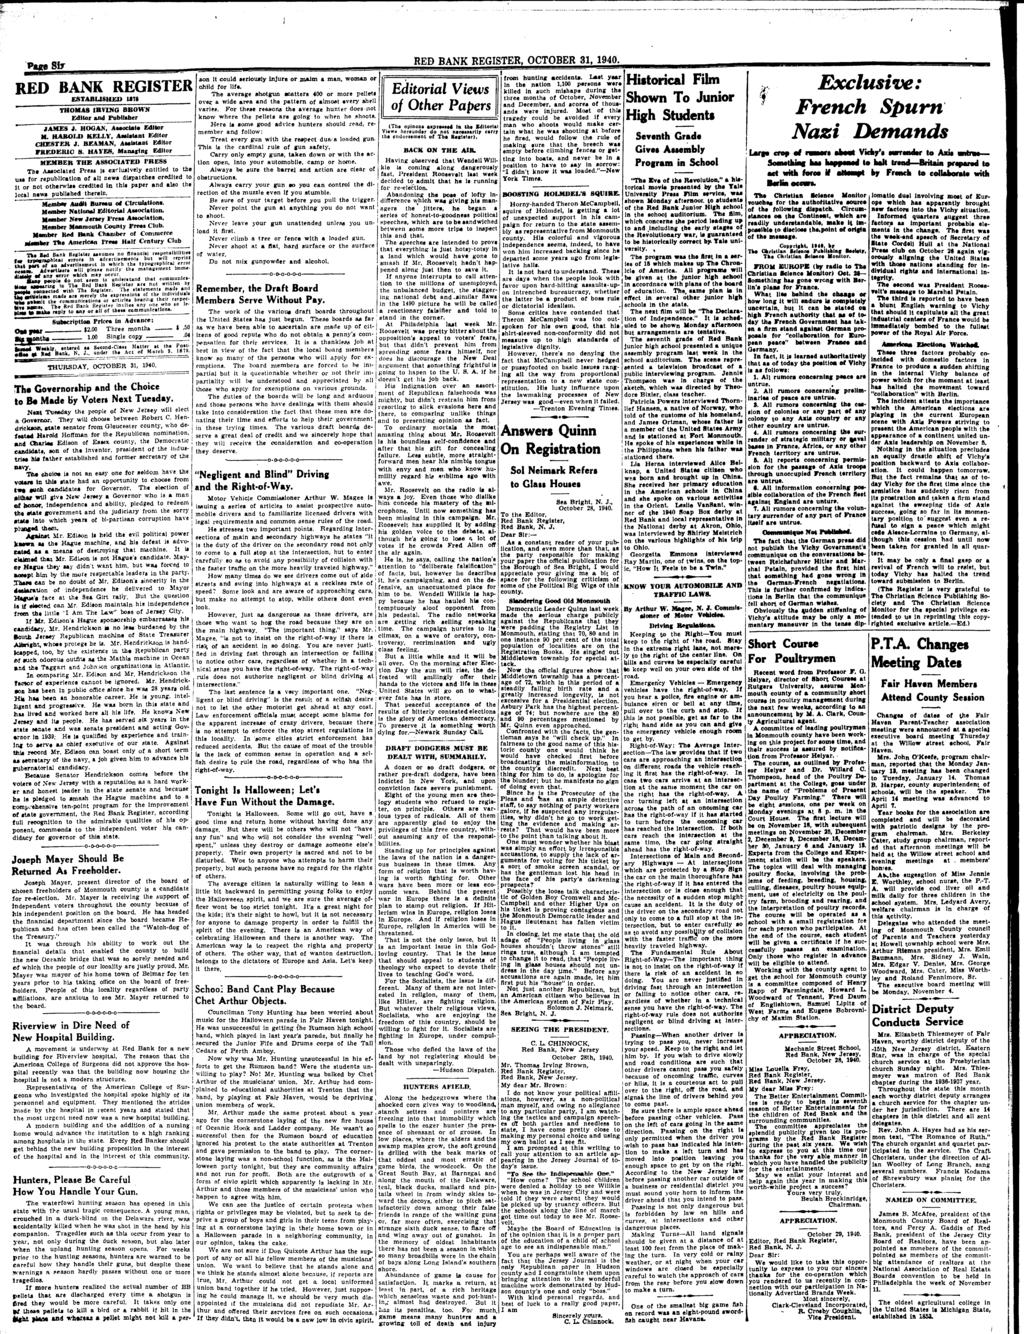 Page Sir RED BANK REGISTER, OCTOBER 31. 1940. RED BANK REGISTER ESTABLISHED 1178 THOMAS IBVING BBOWN Editor and Publisher JAKES J. HOGAN, Associate Editor M. HABOLO KELLY, Assistant Editor CHESTER J.